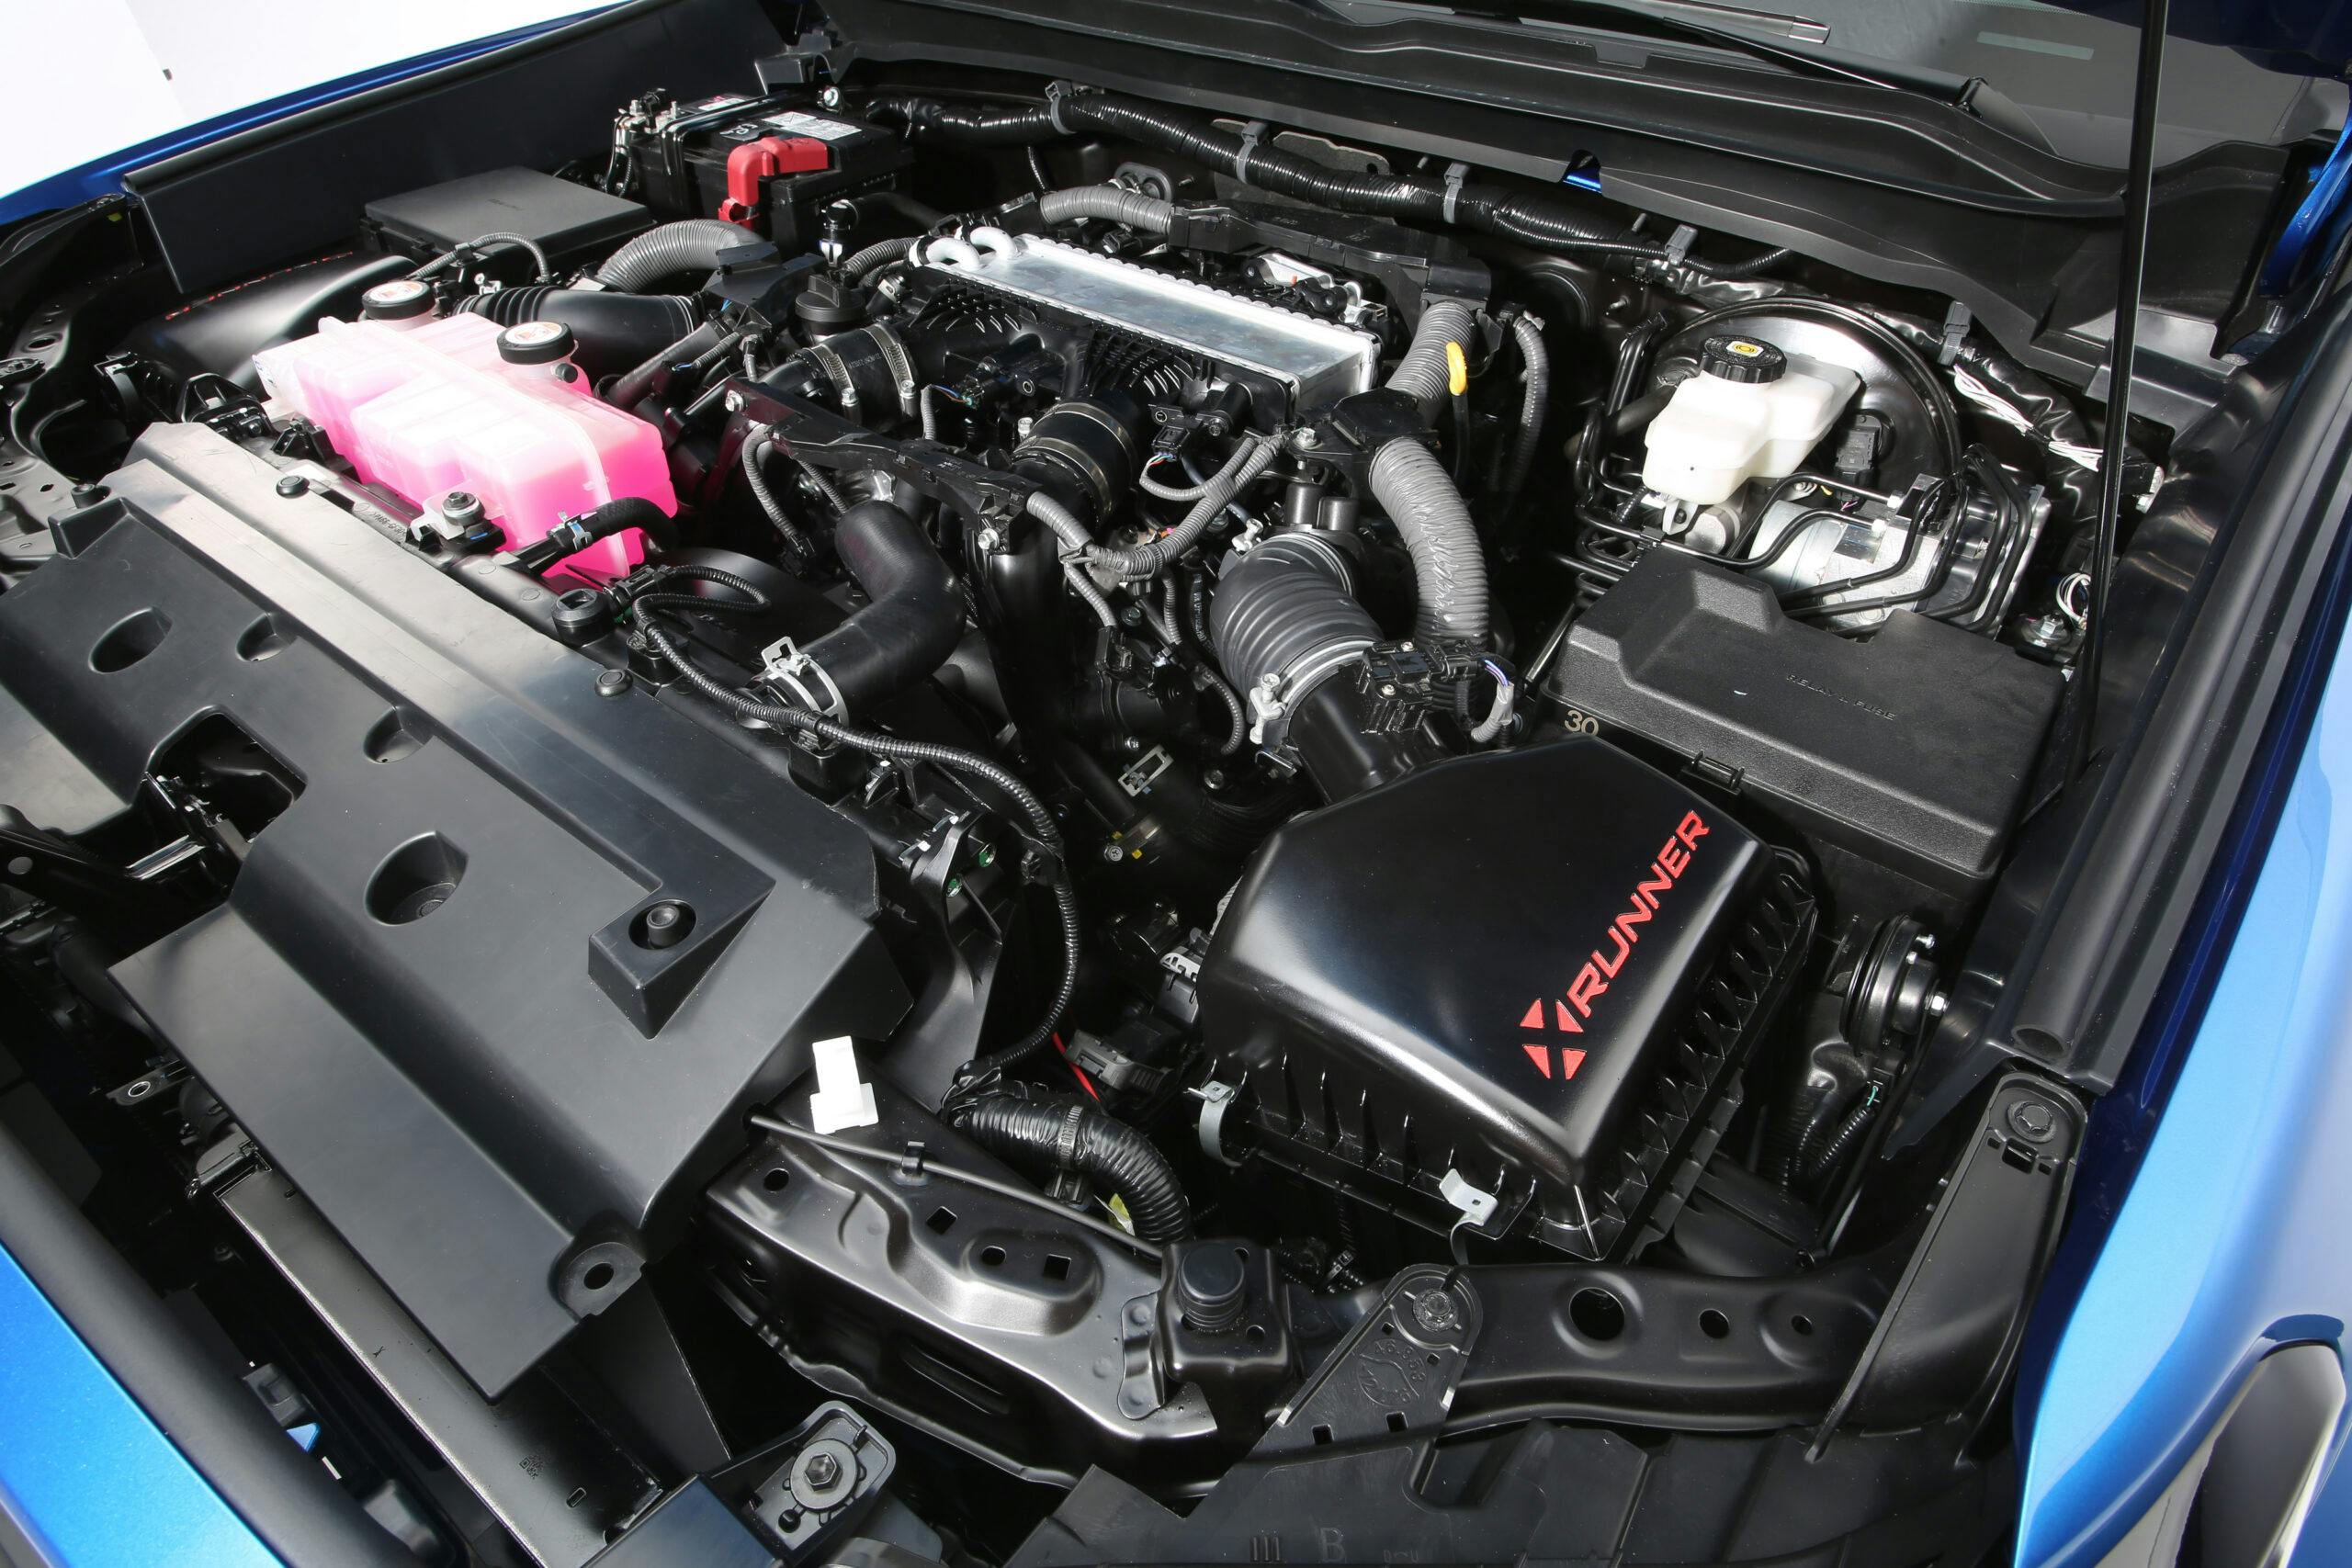 Toyota Tacoma X-Runner Concept engine detail